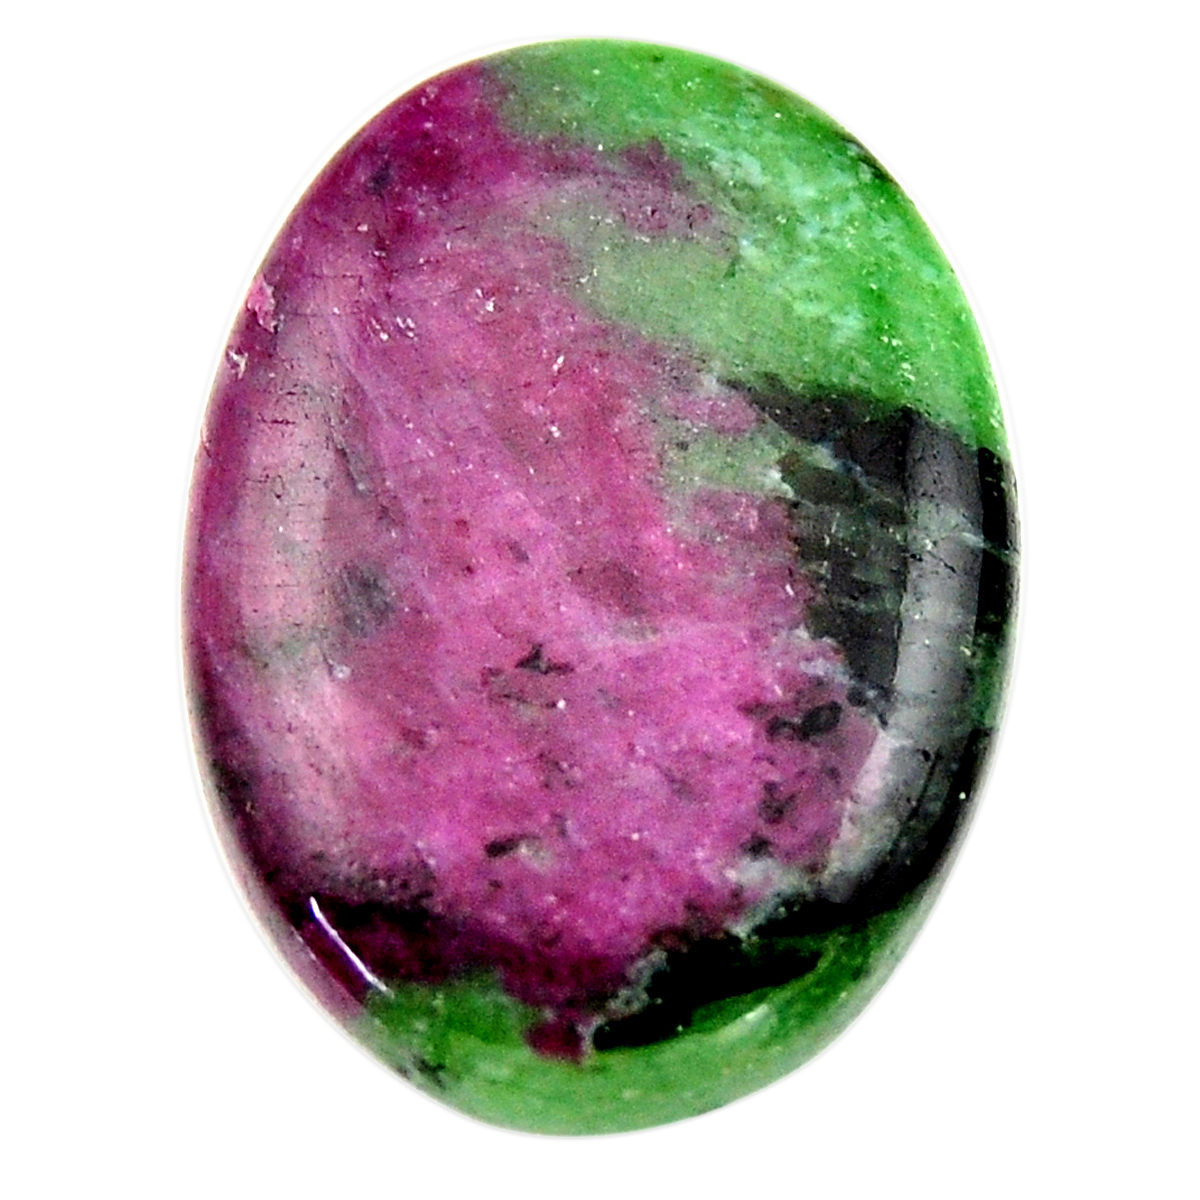 Top Grade Quality 100% Natural Ruby Zoisite Oval Shape Cabochon Loose Gemstone For Making Jewelry 36X23X5 mm D-3668 42.5 Ct